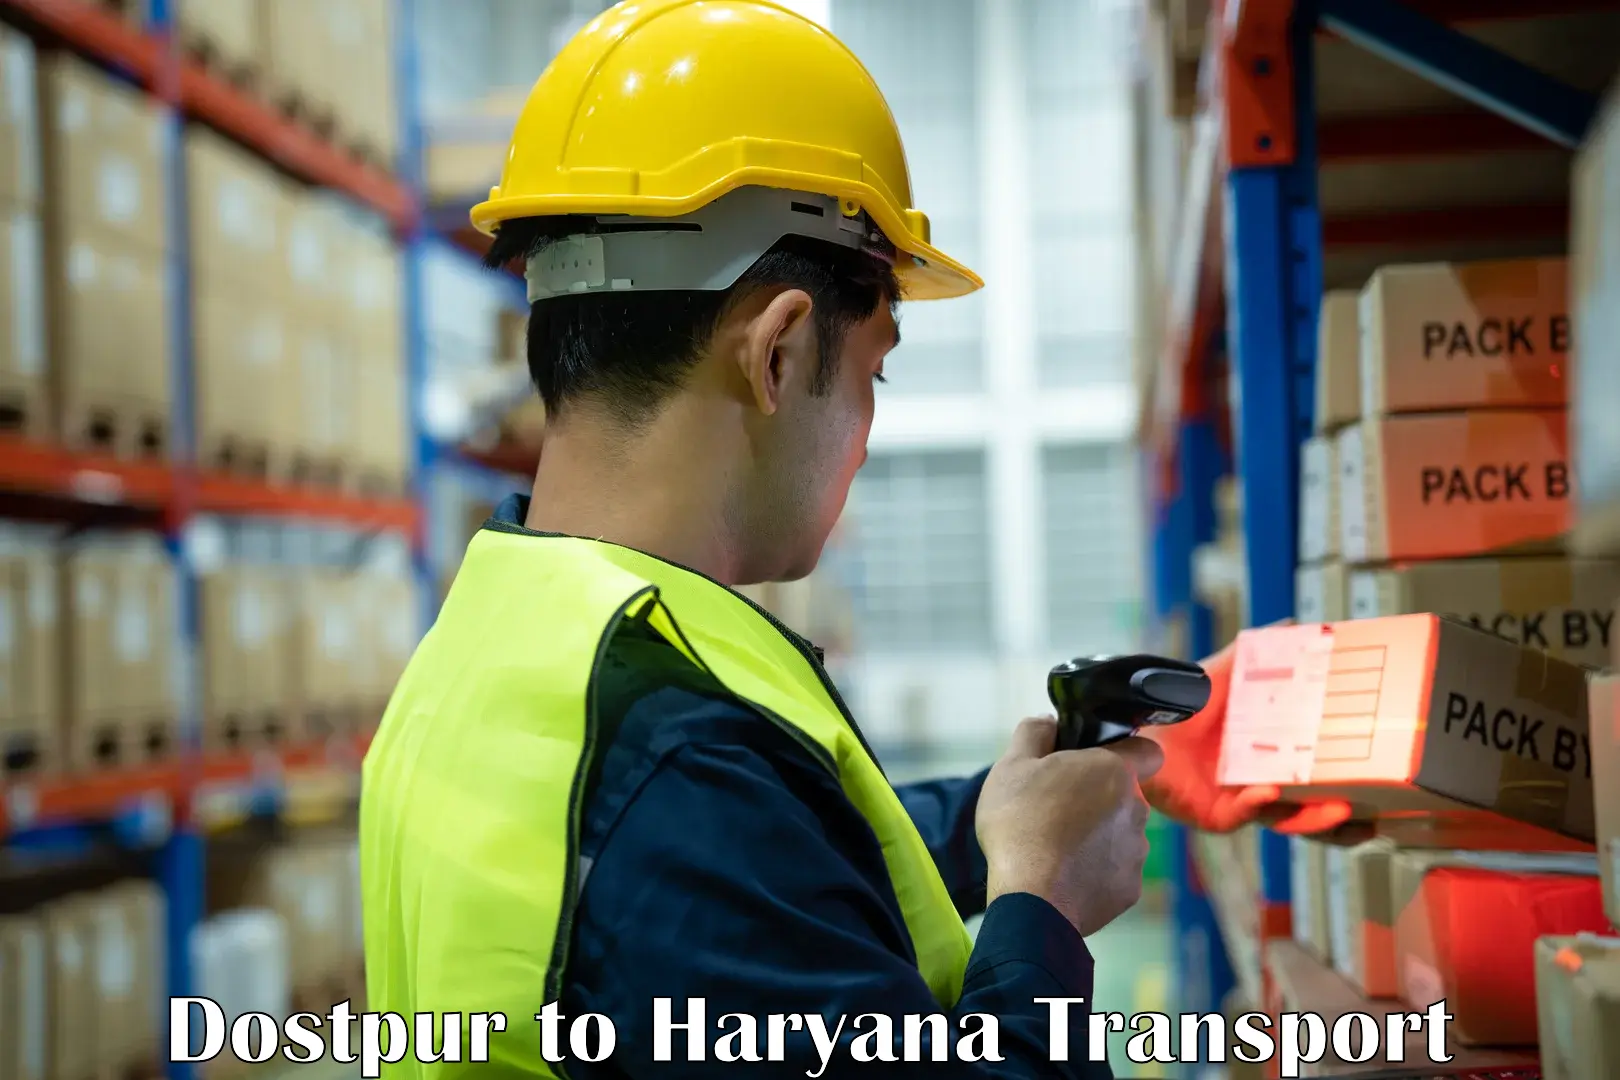 Air freight transport services Dostpur to Haryana